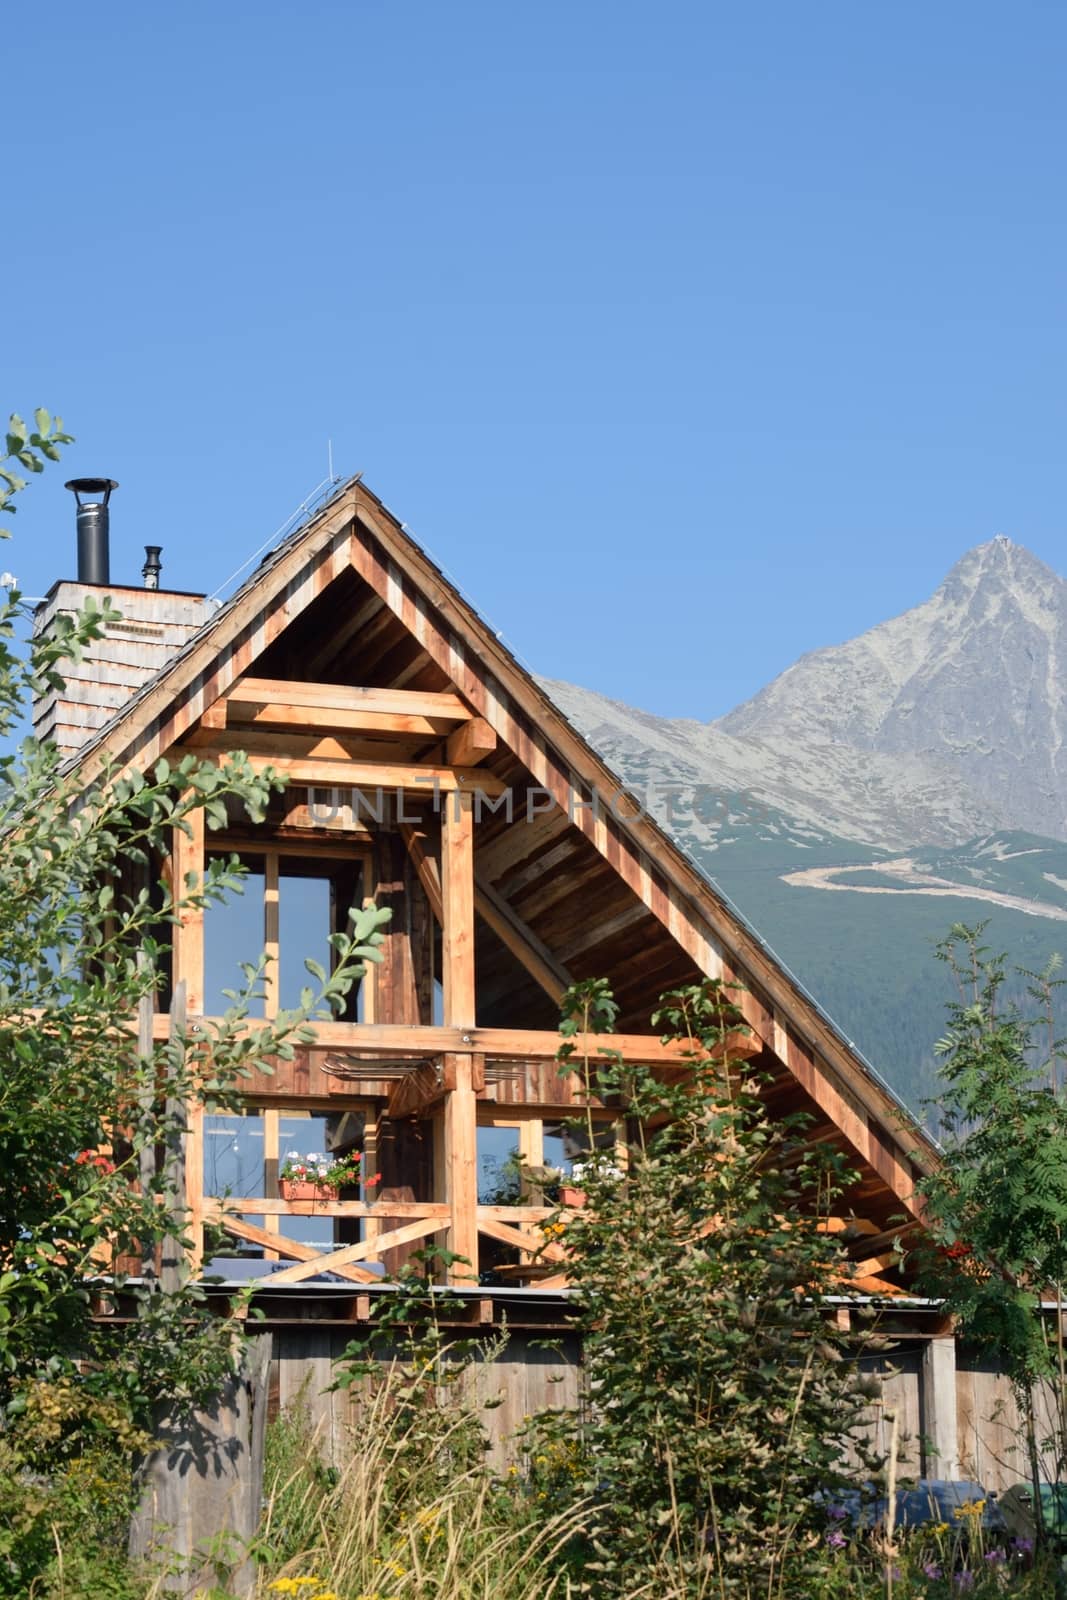 Wooden mountain cottage with mountains in background